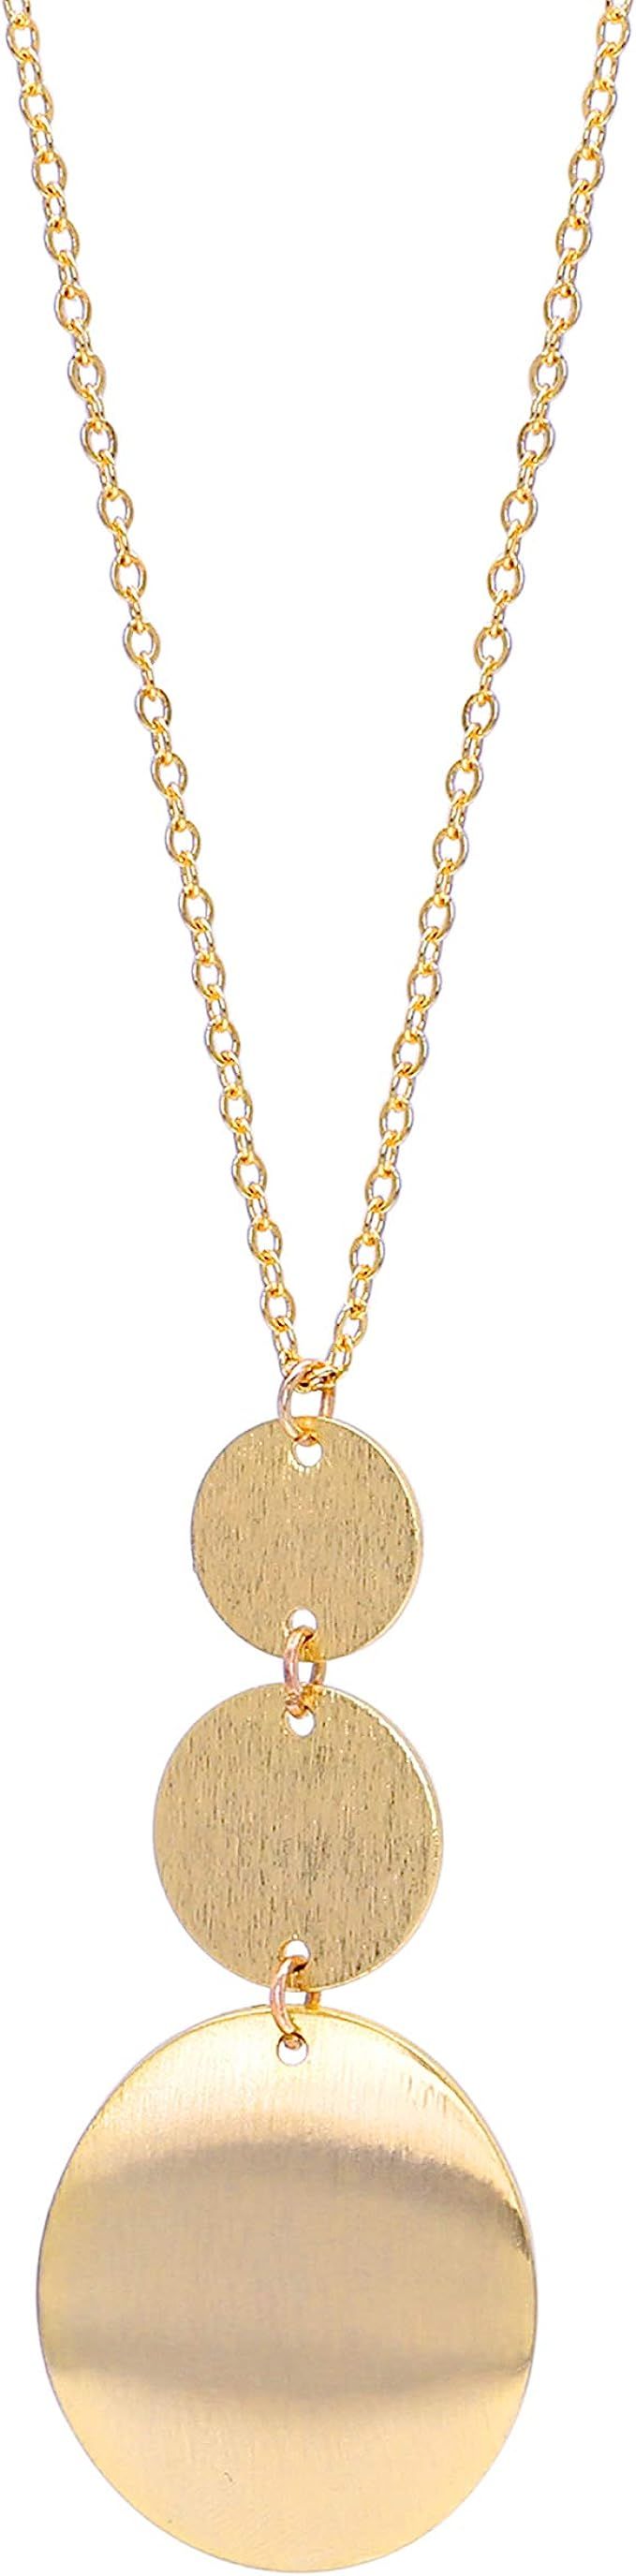 PERNNLA PEARL Long Disc Pendant Necklace for Women 18K Gold Plated Sweater Chain Fashion Jewelry | Amazon (US)